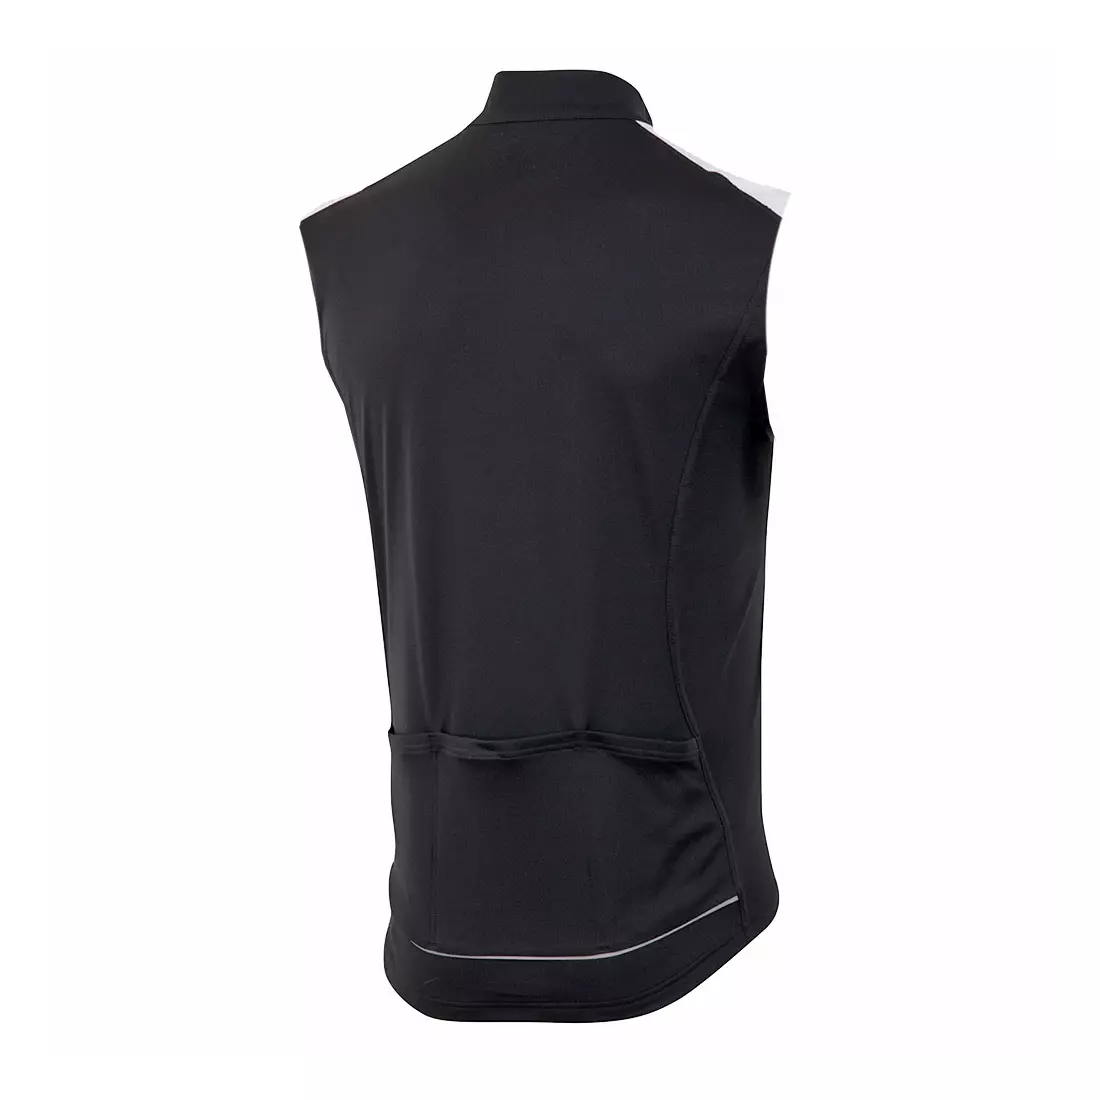 PEARL IZUMI SELECT QUEST - men's sleeveless cycling jersey 11121408-021